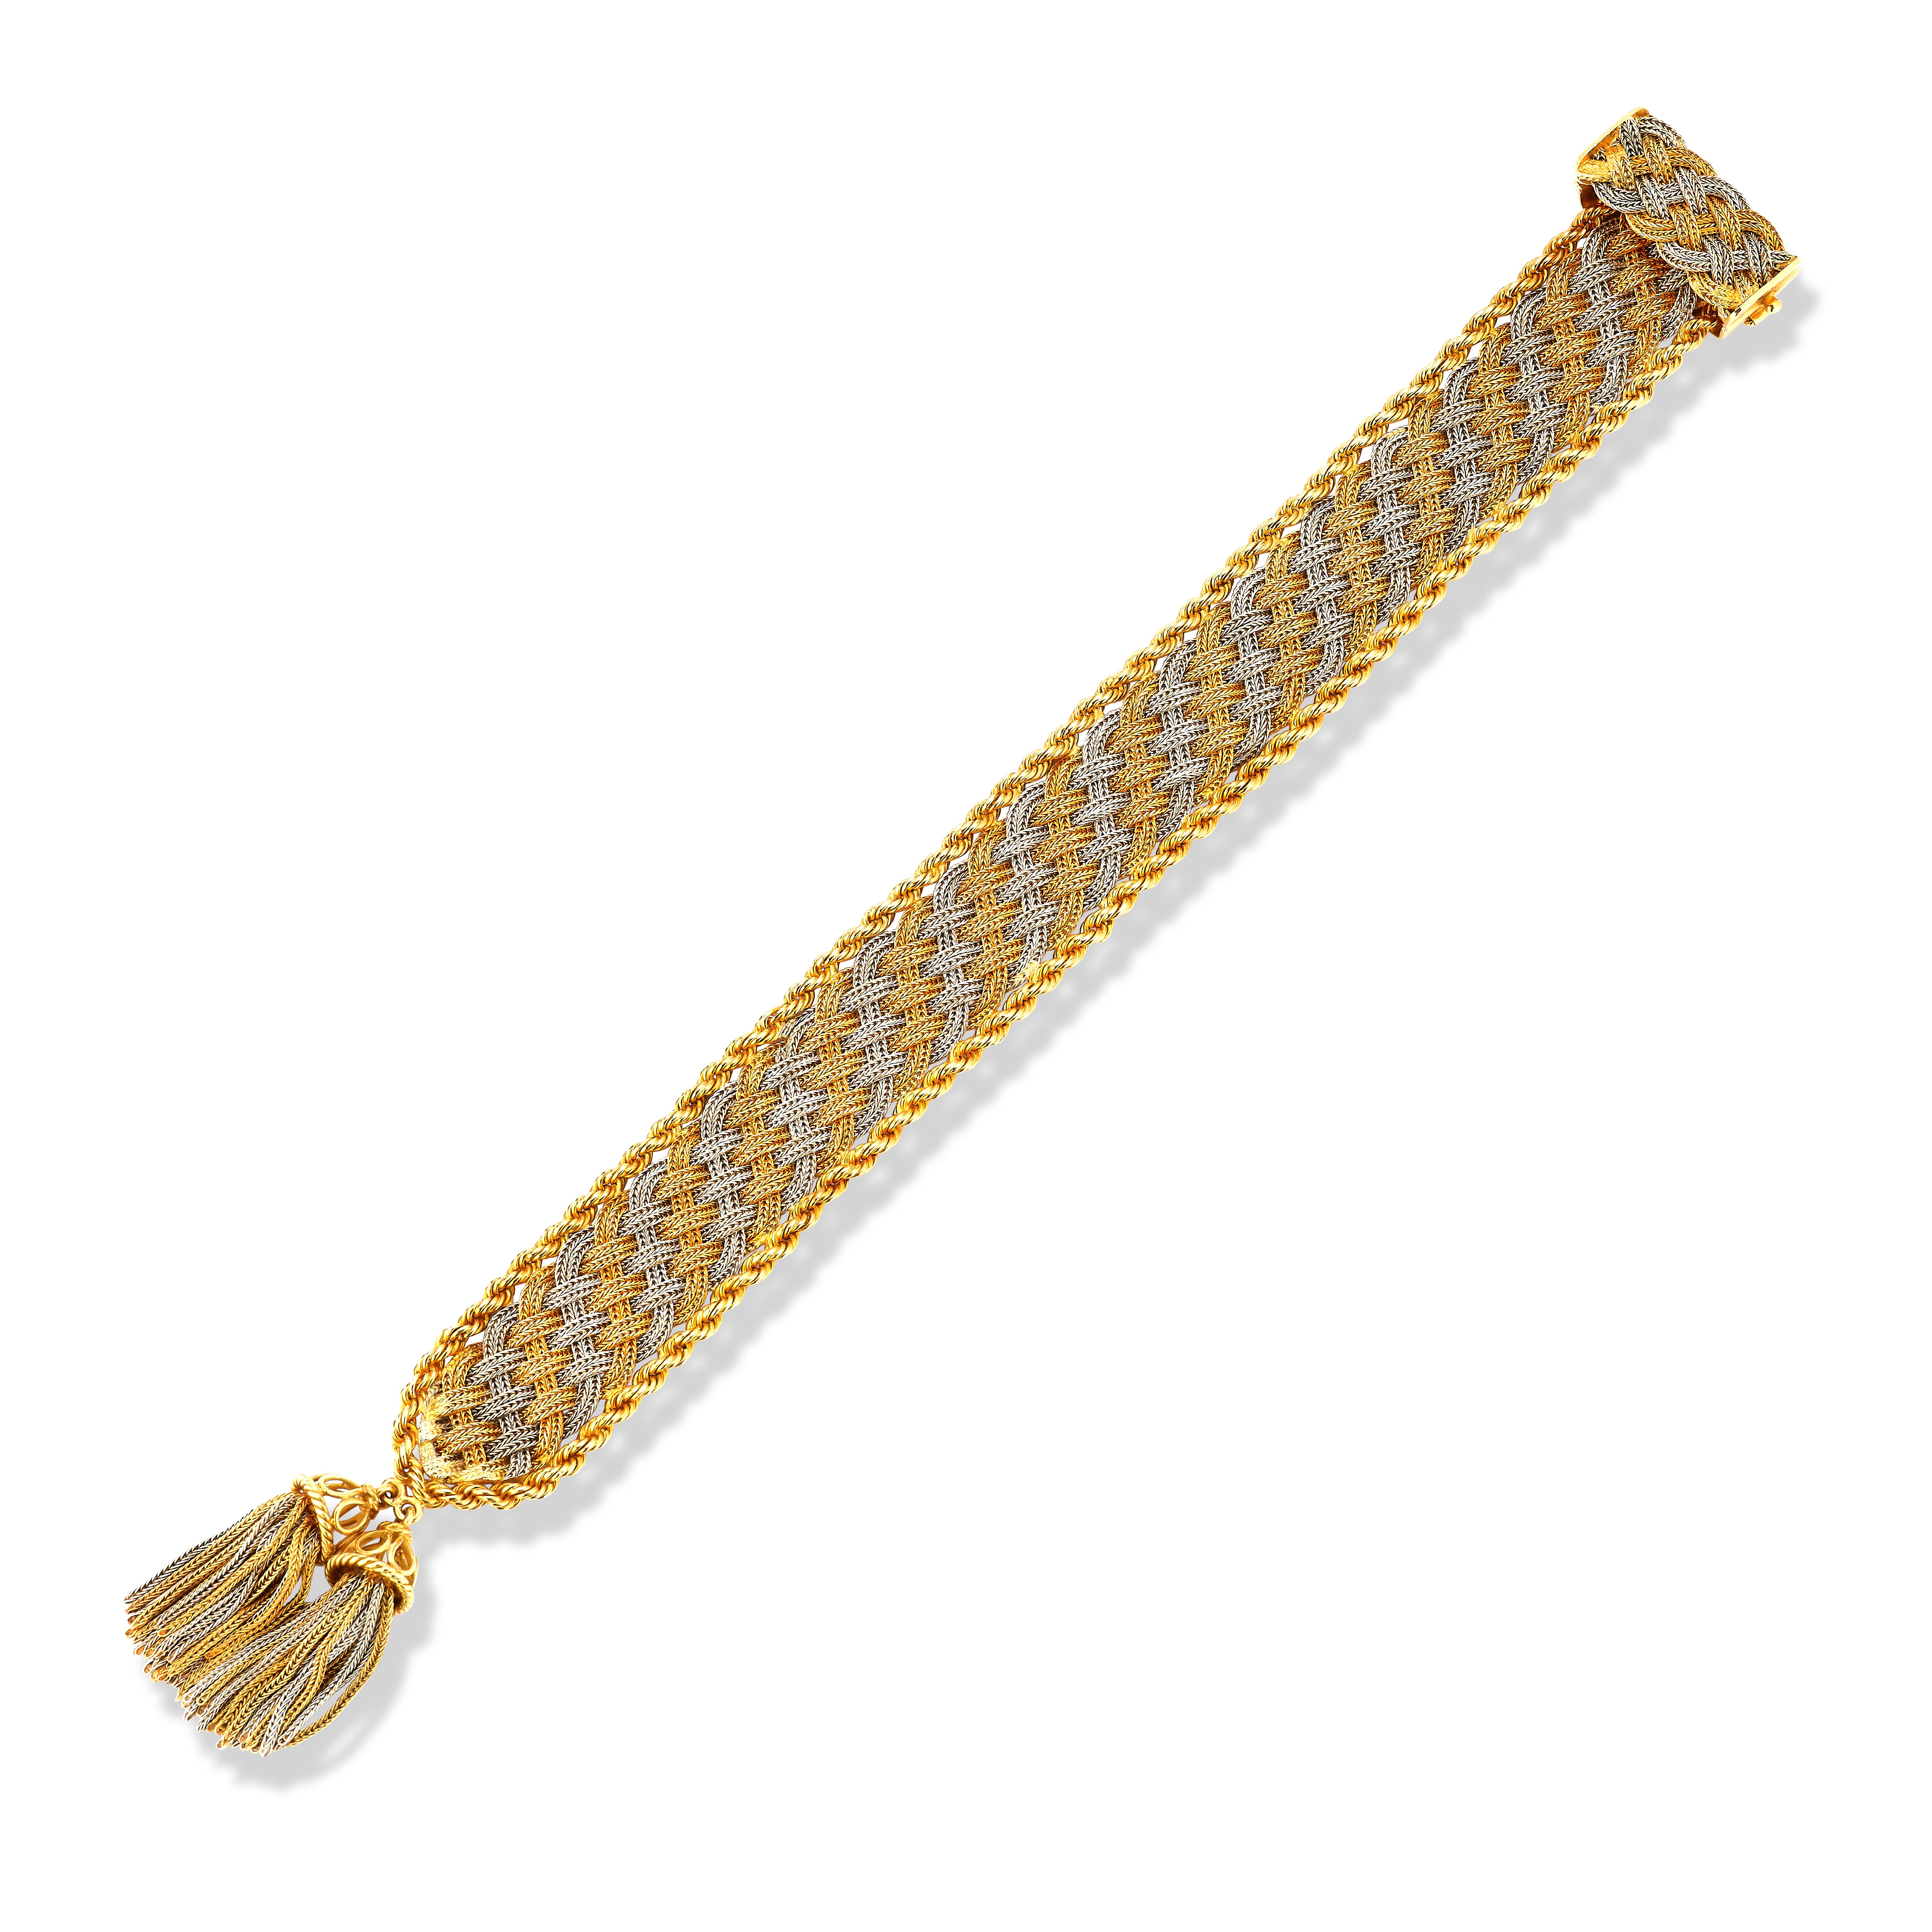 Bulgari Two Tone Gold Tassel Bracelet 

A two tone gold  bracelet with a wove rope motif pattern with two tassels elegantly draping from the side. 

***Length is adjustable***
Measurements:  bracelet, 8.75